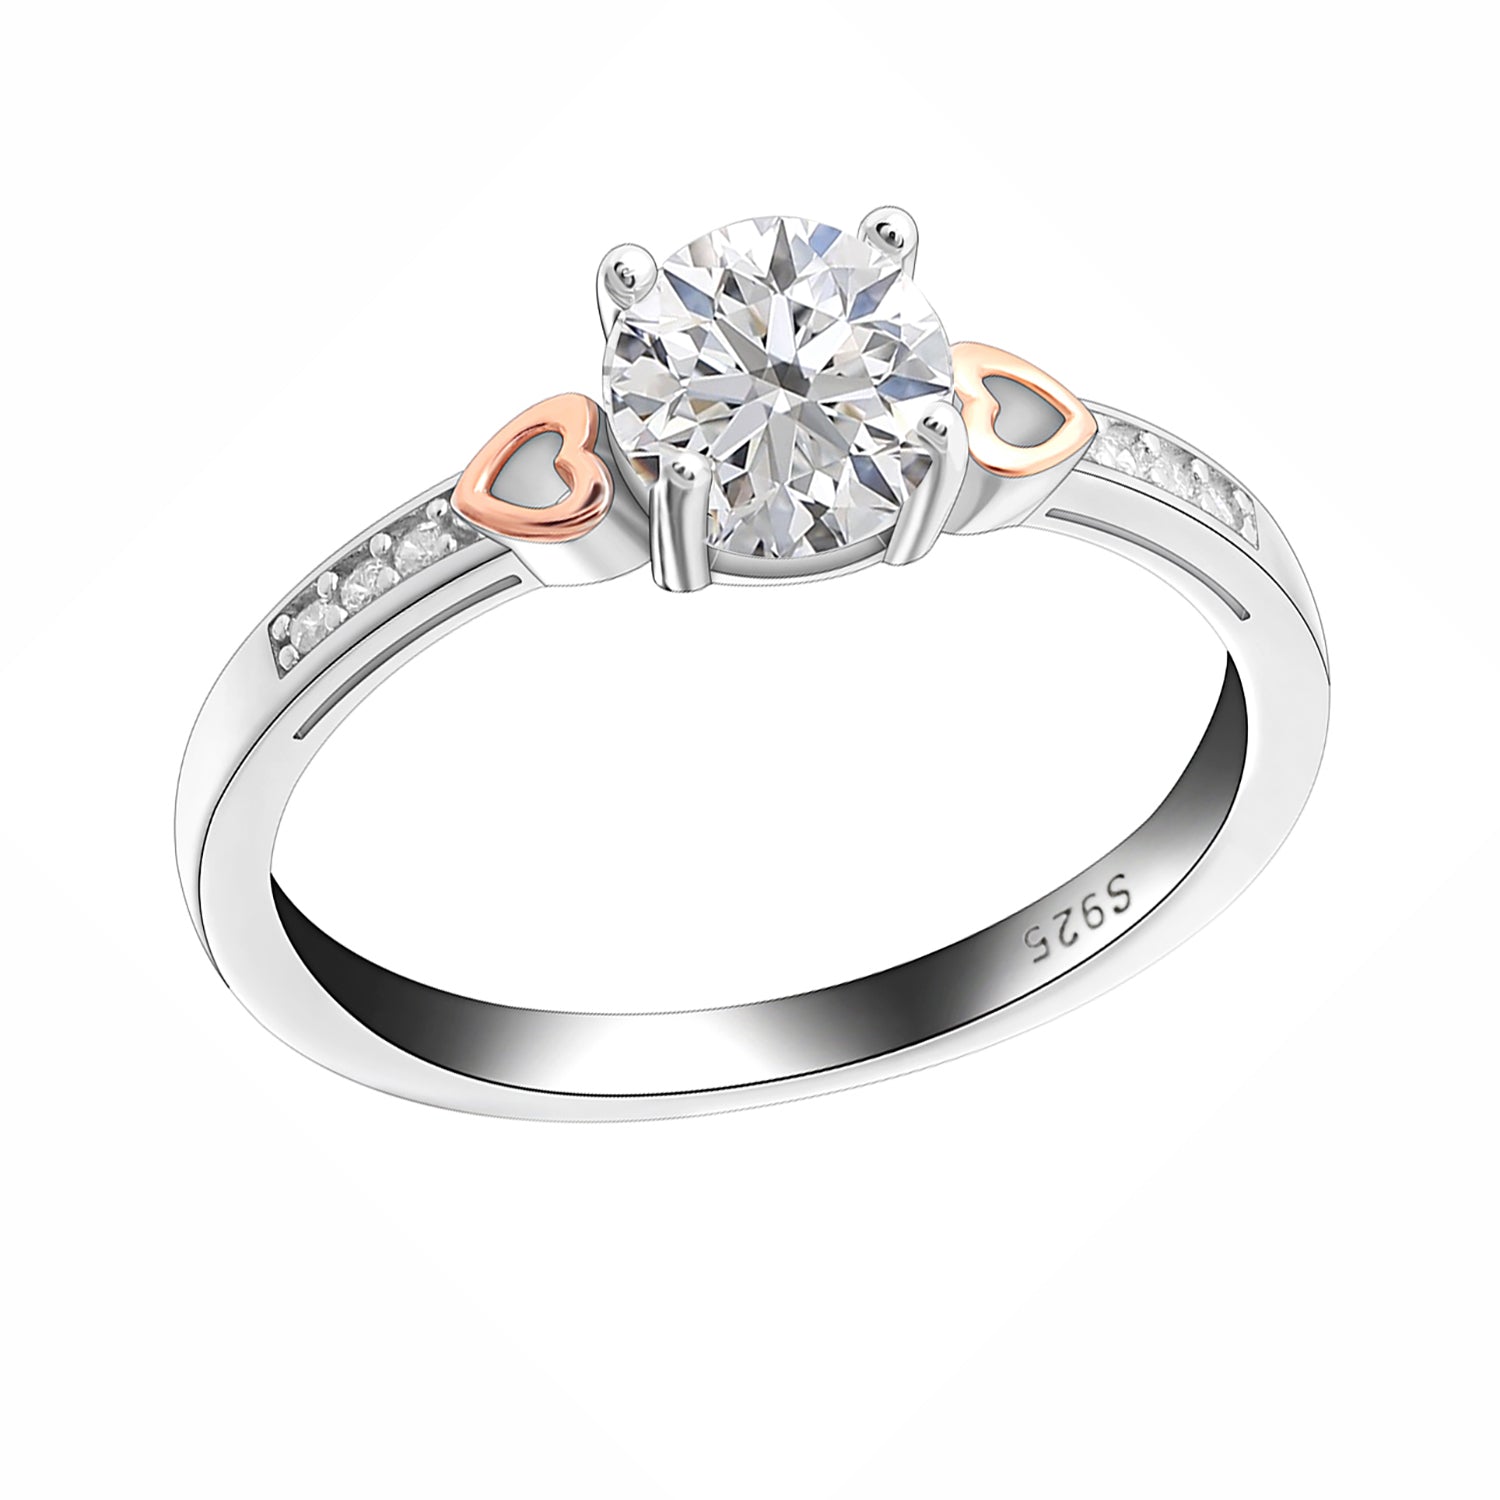 Valentina Engagement Ring Solitaire Cz Sterling Silver Womens Ginger Lyne Size 6 - 6